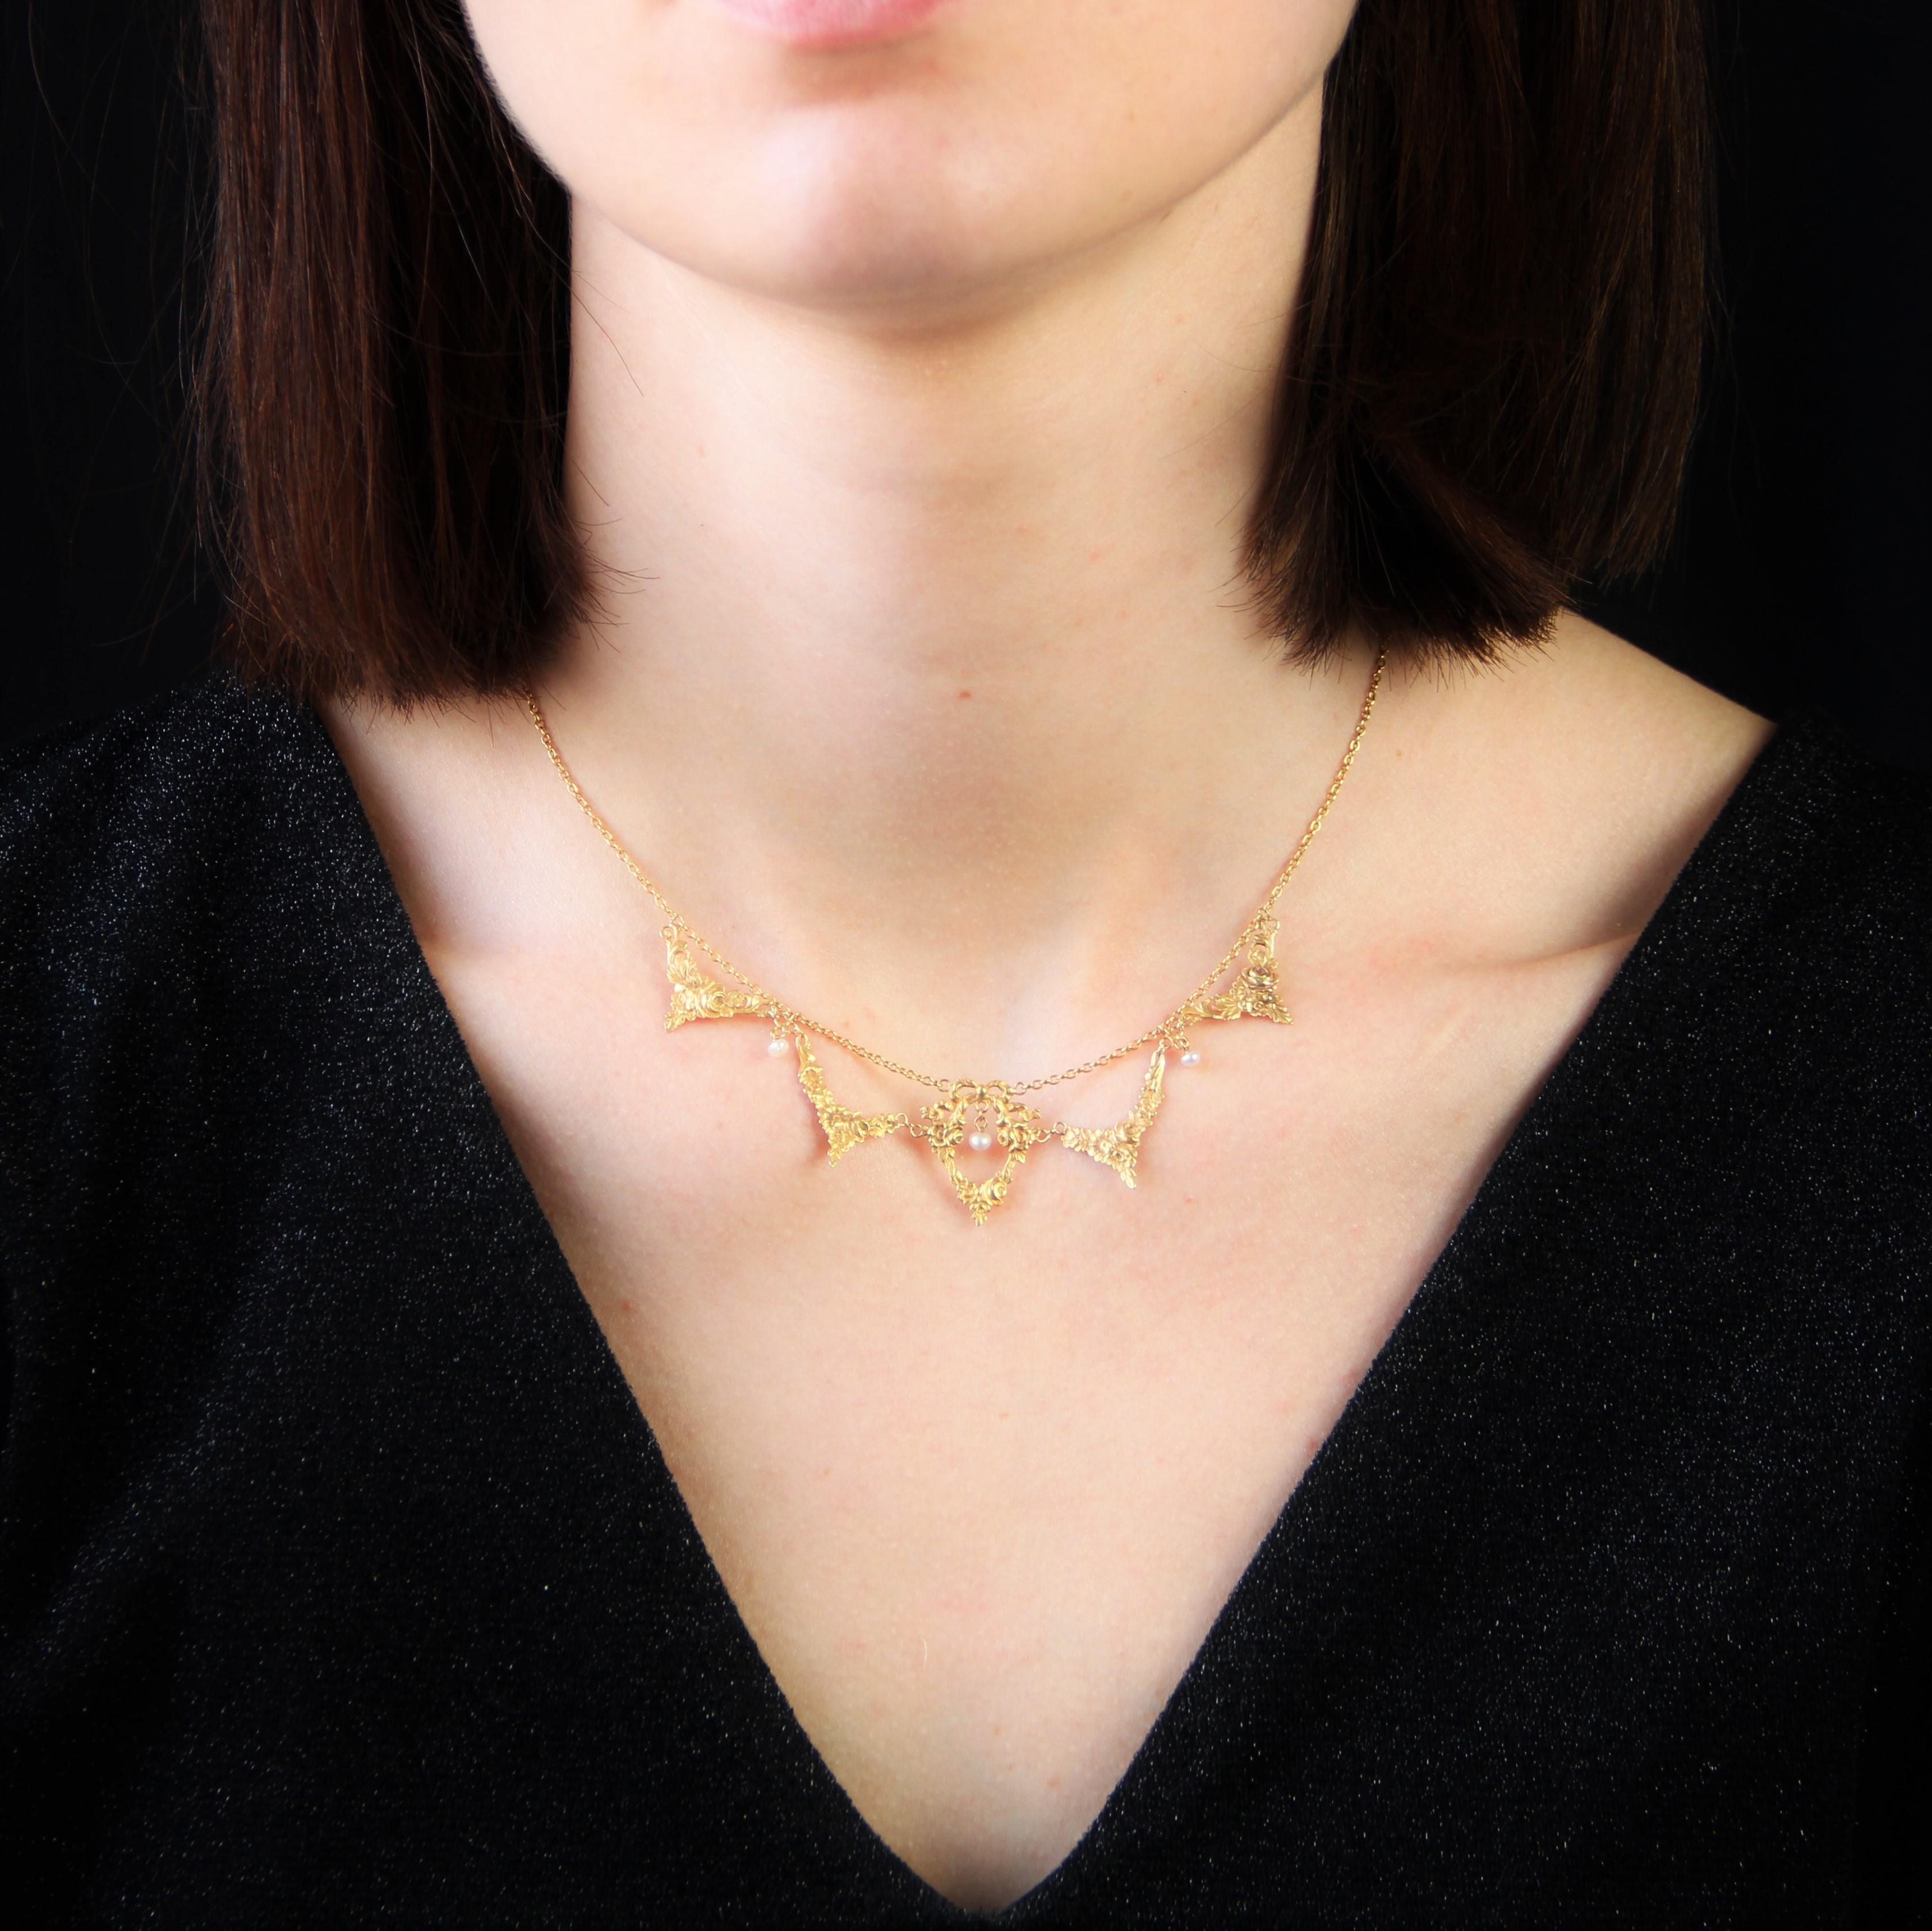 Necklace in 18 karat yellow gold, eagle head hallmark.
Antique necklace, called drapery, it is formed of a thin convict mesh chain holding on the front 5 patterns, engraved with floral decorations, knots and garlands. 3 small pearly white baroque